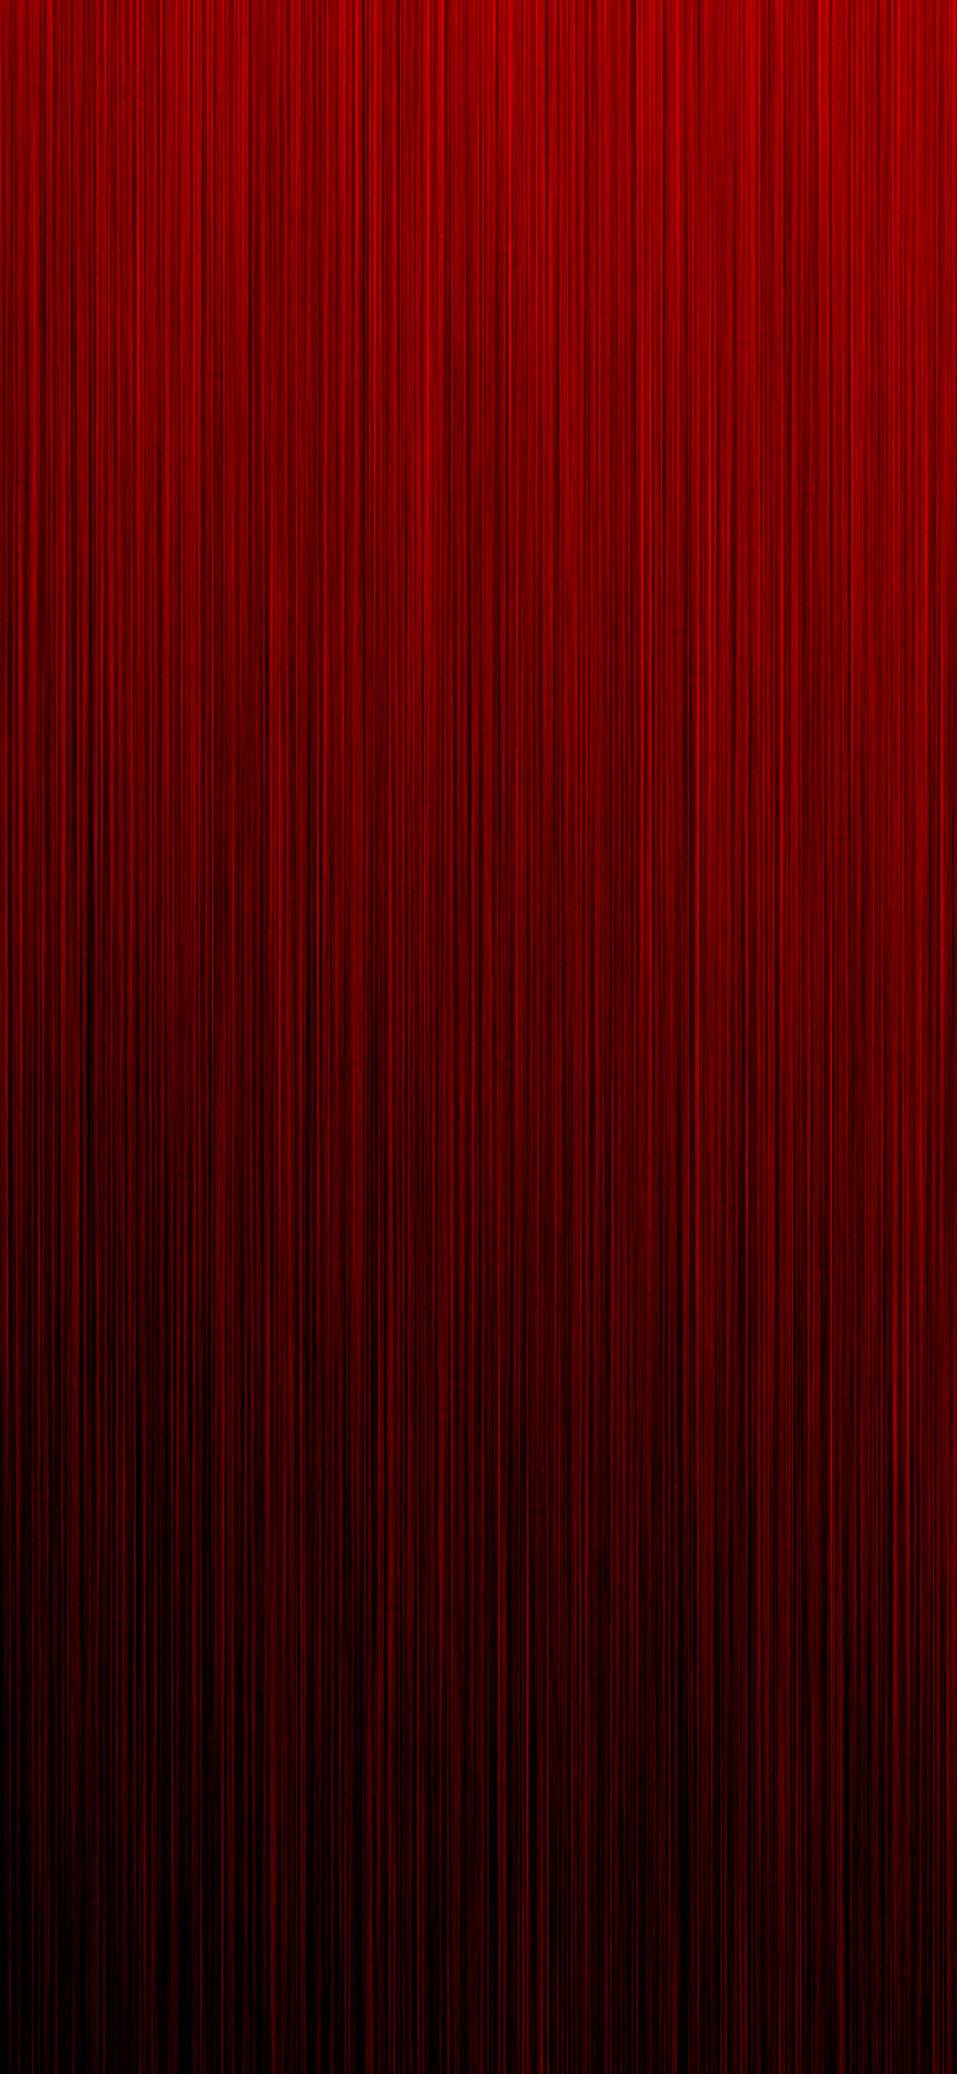 red background wallpaper hd s24 min